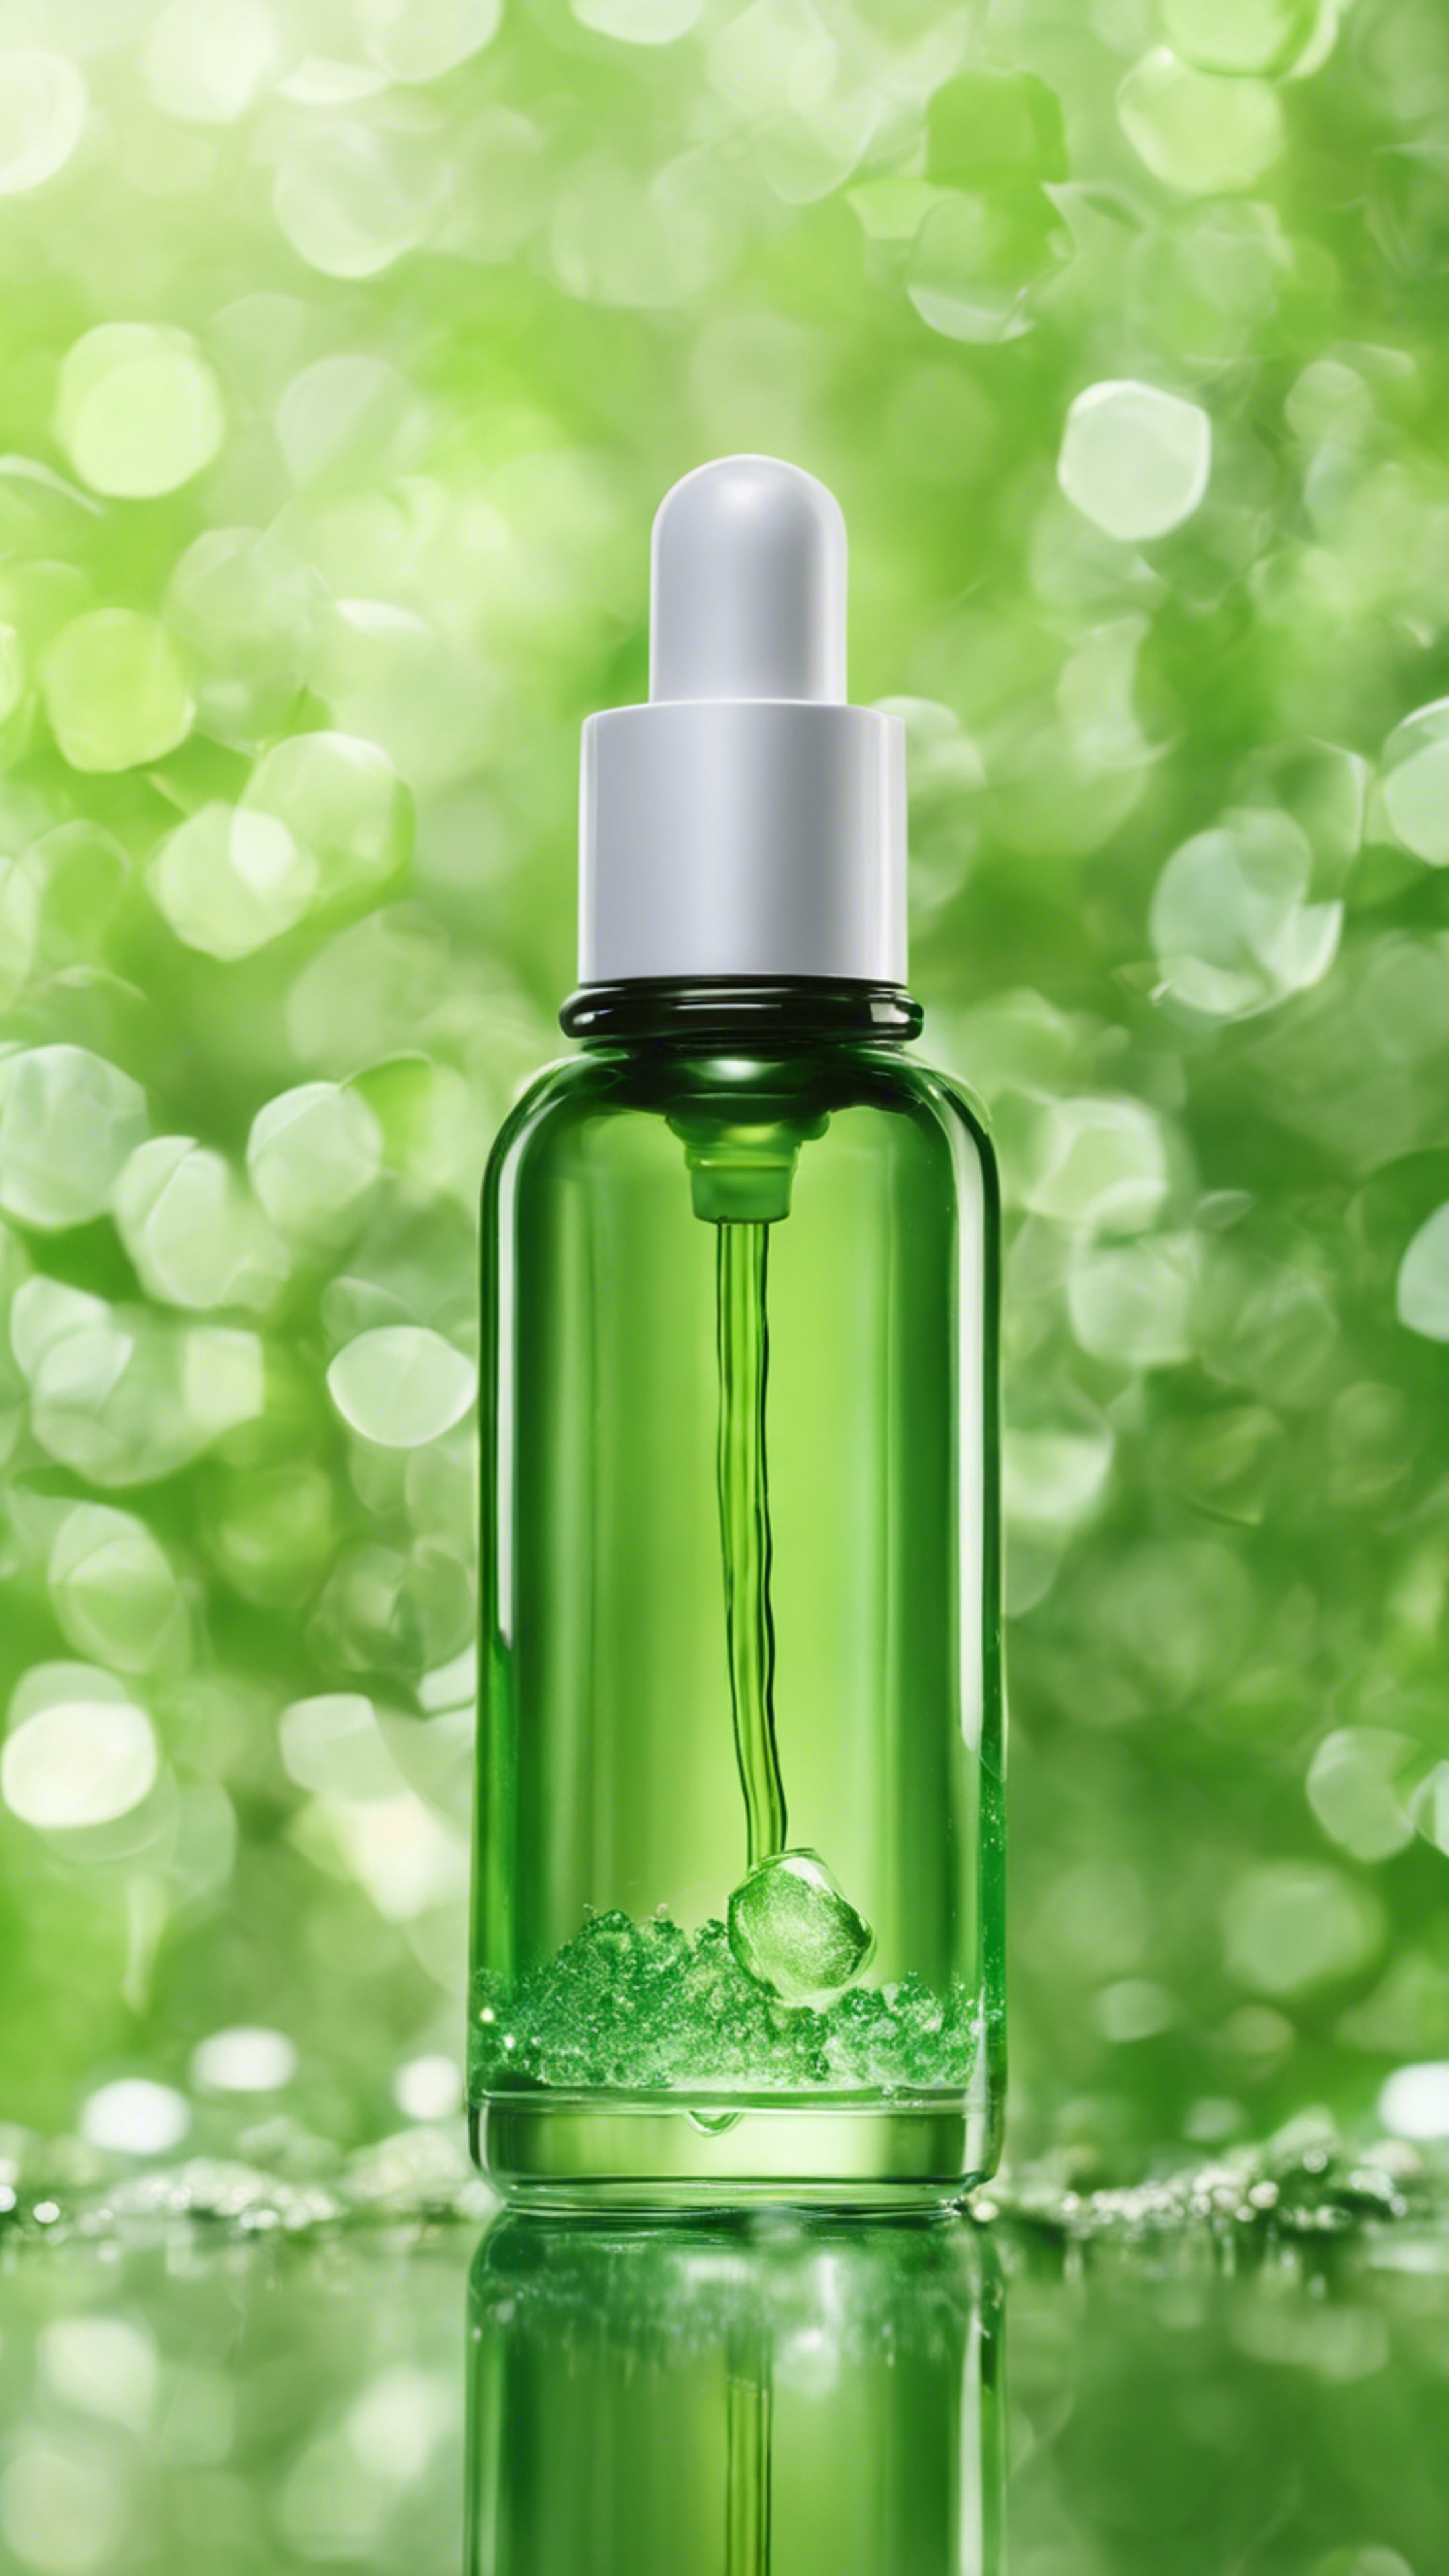 Green an eco-friendly cosmetics company's new hydrating face serum in a recyclable glass bottle. Tapetai[04a9344189e843ad9259]